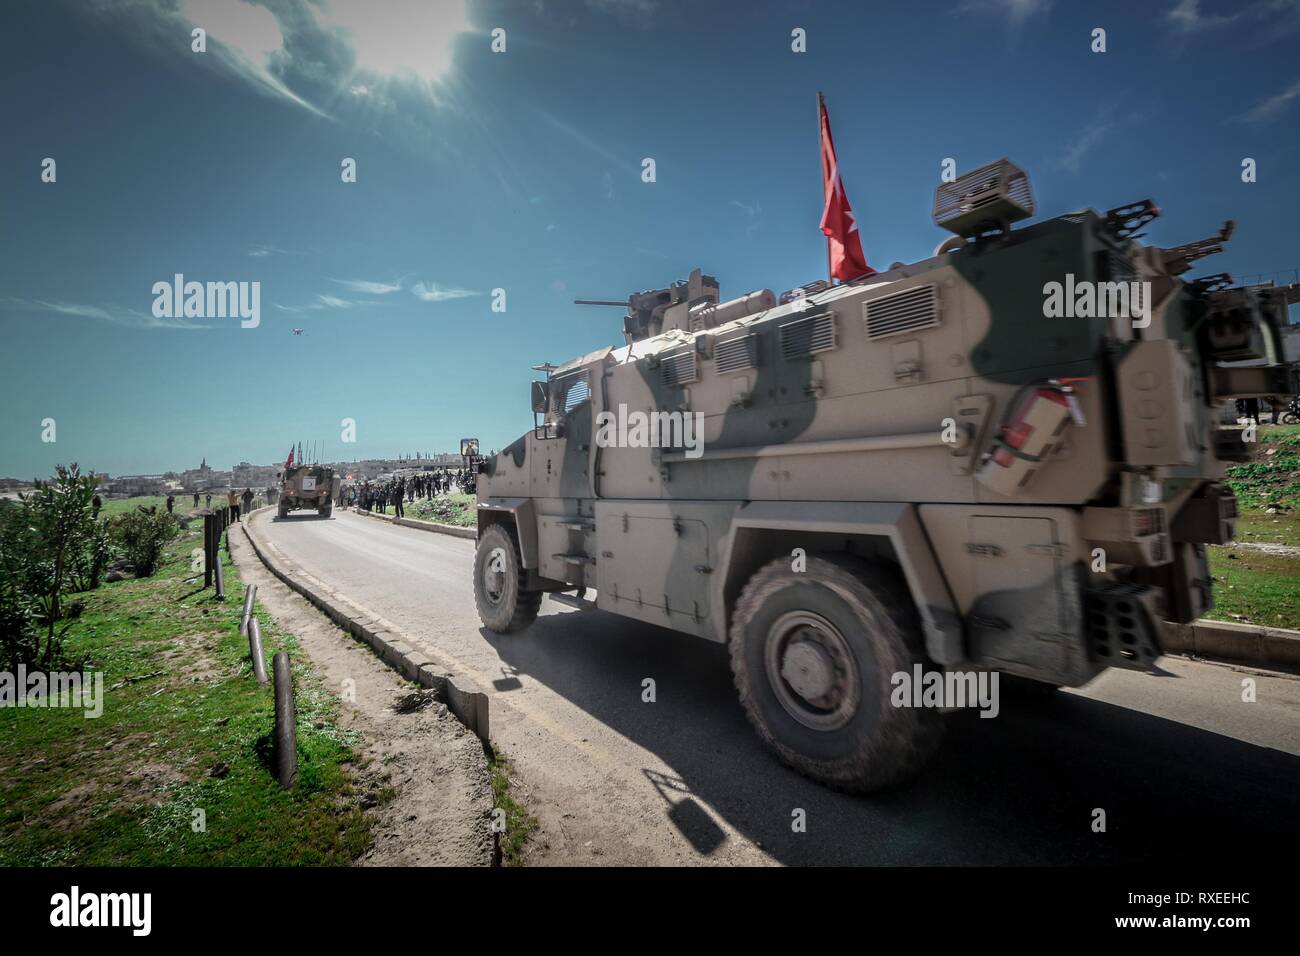 An armored vehicle seen during the patrol. The Turkish army begins its first patrol around the Syrian border in the demilitarized zone between the control points with a number of armored vehicles. Stock Photo